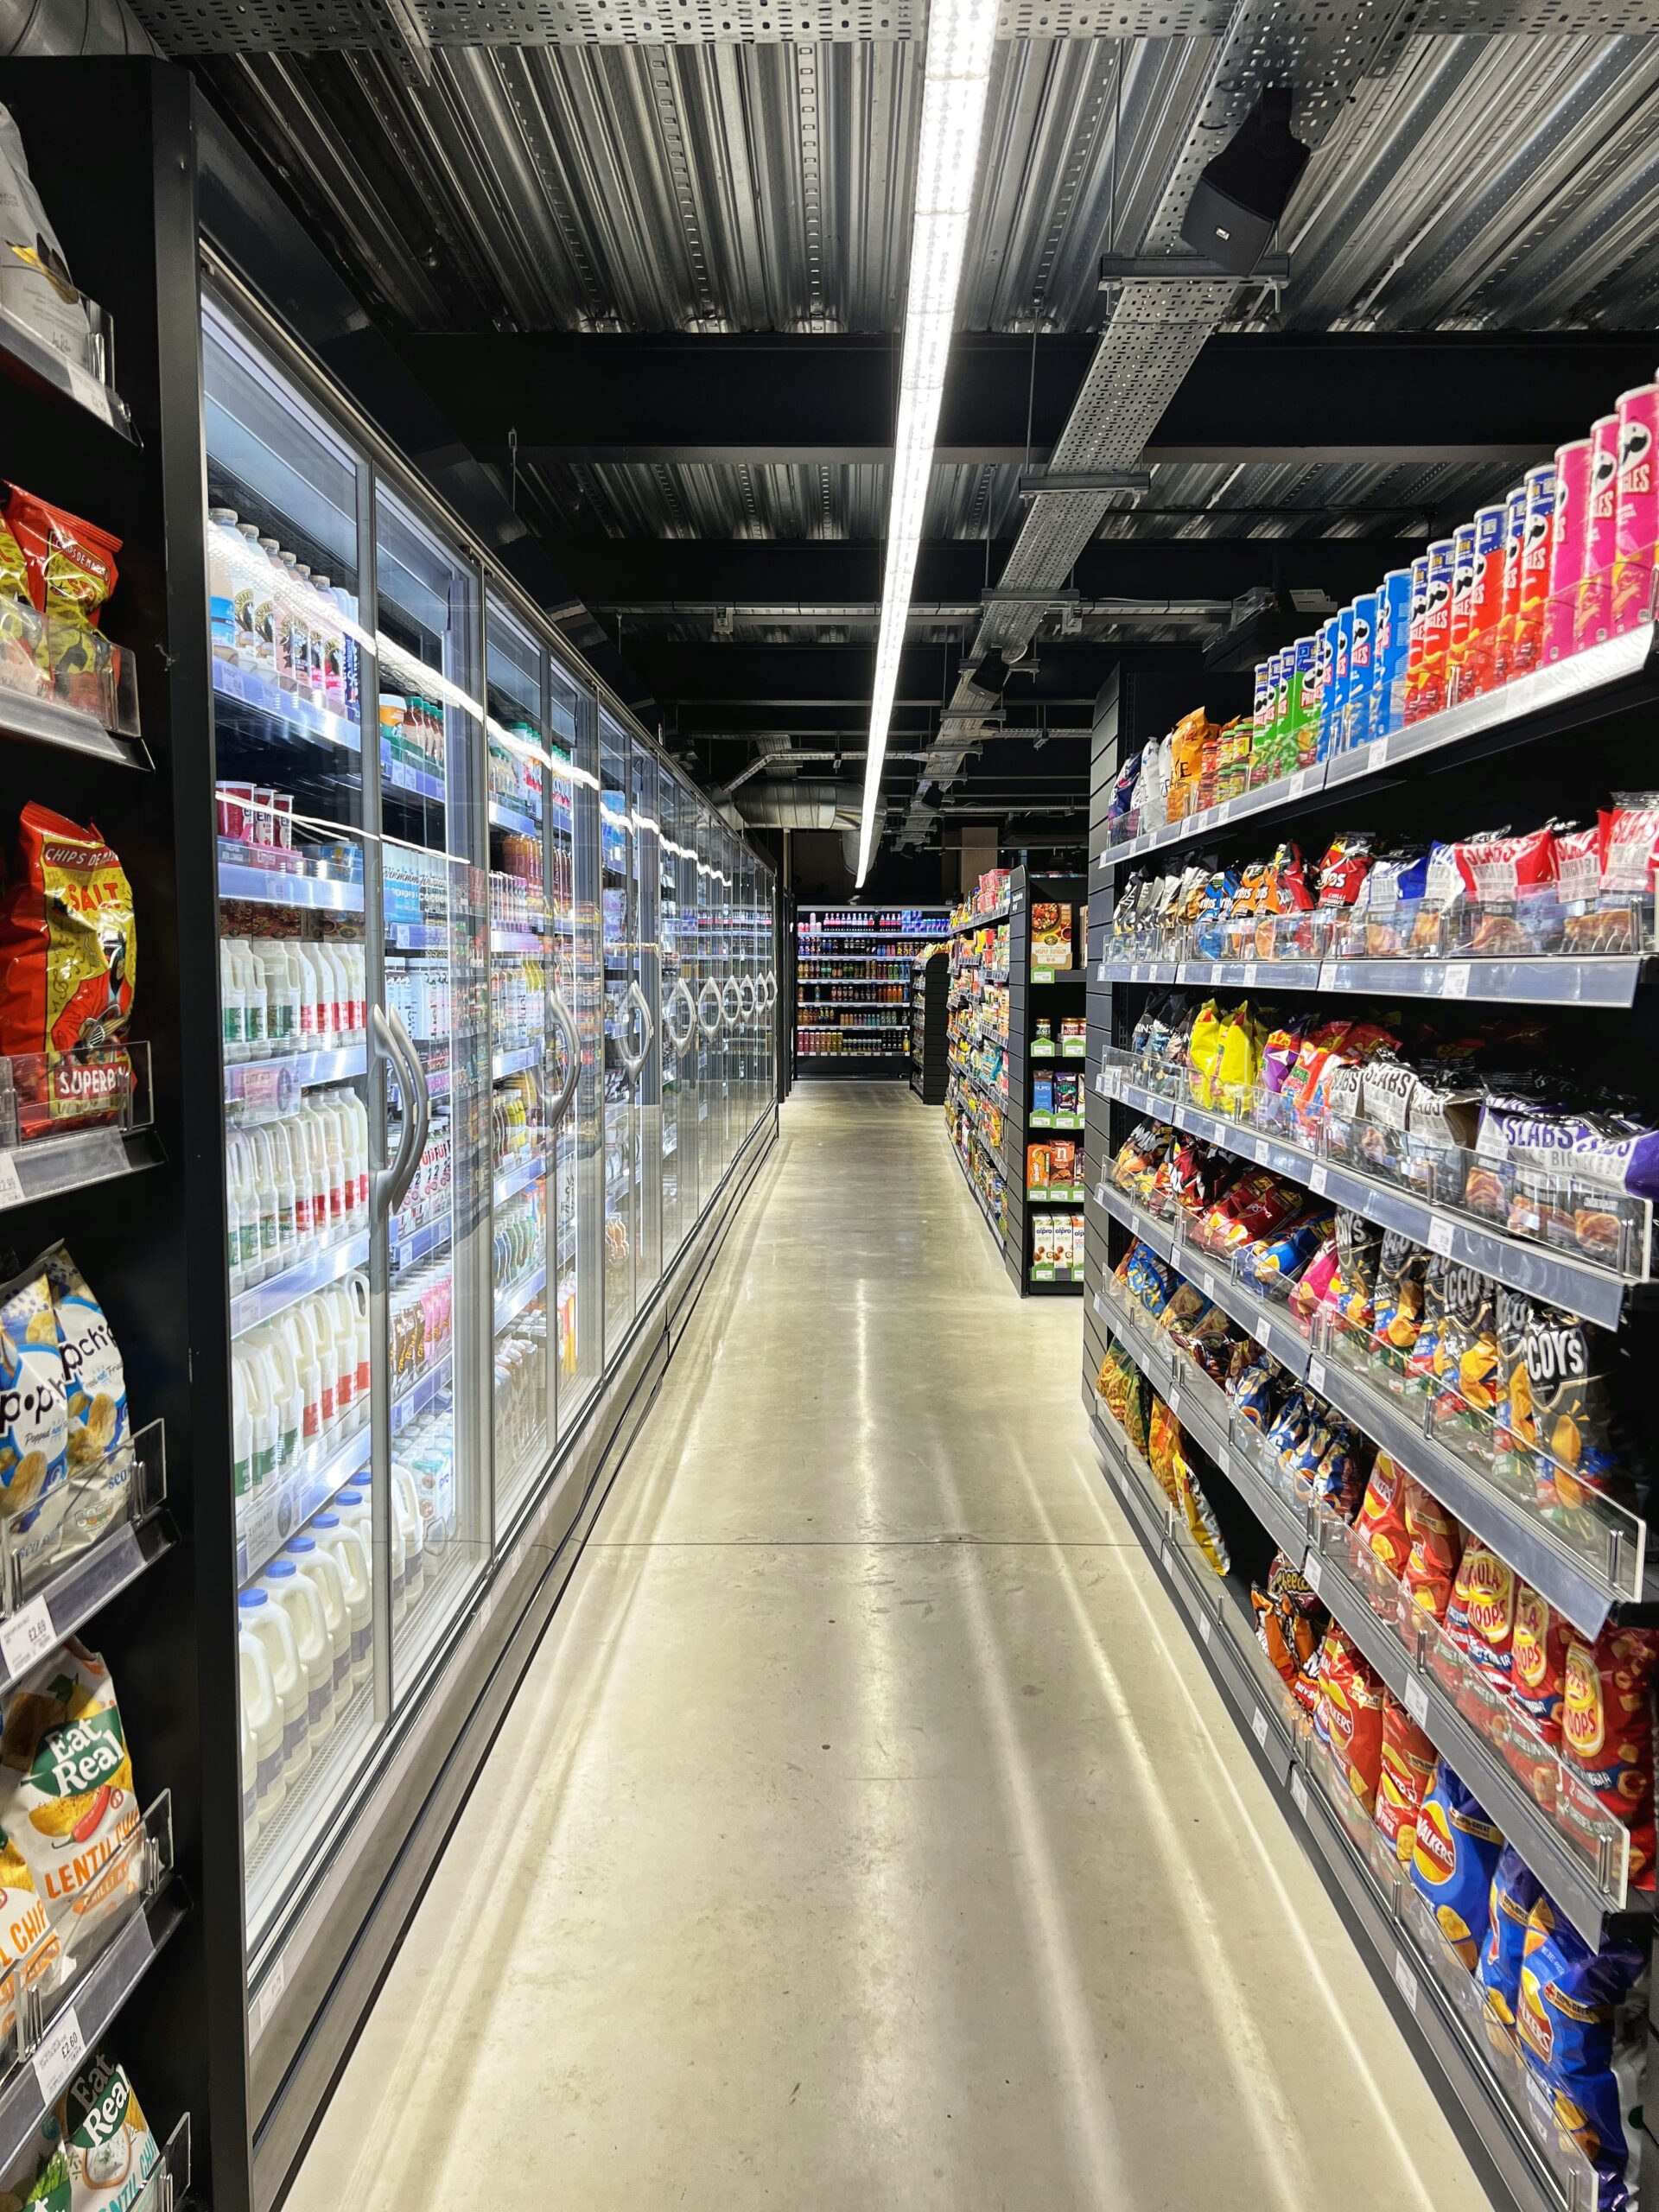 General Stores Kampus is now open in Manchester